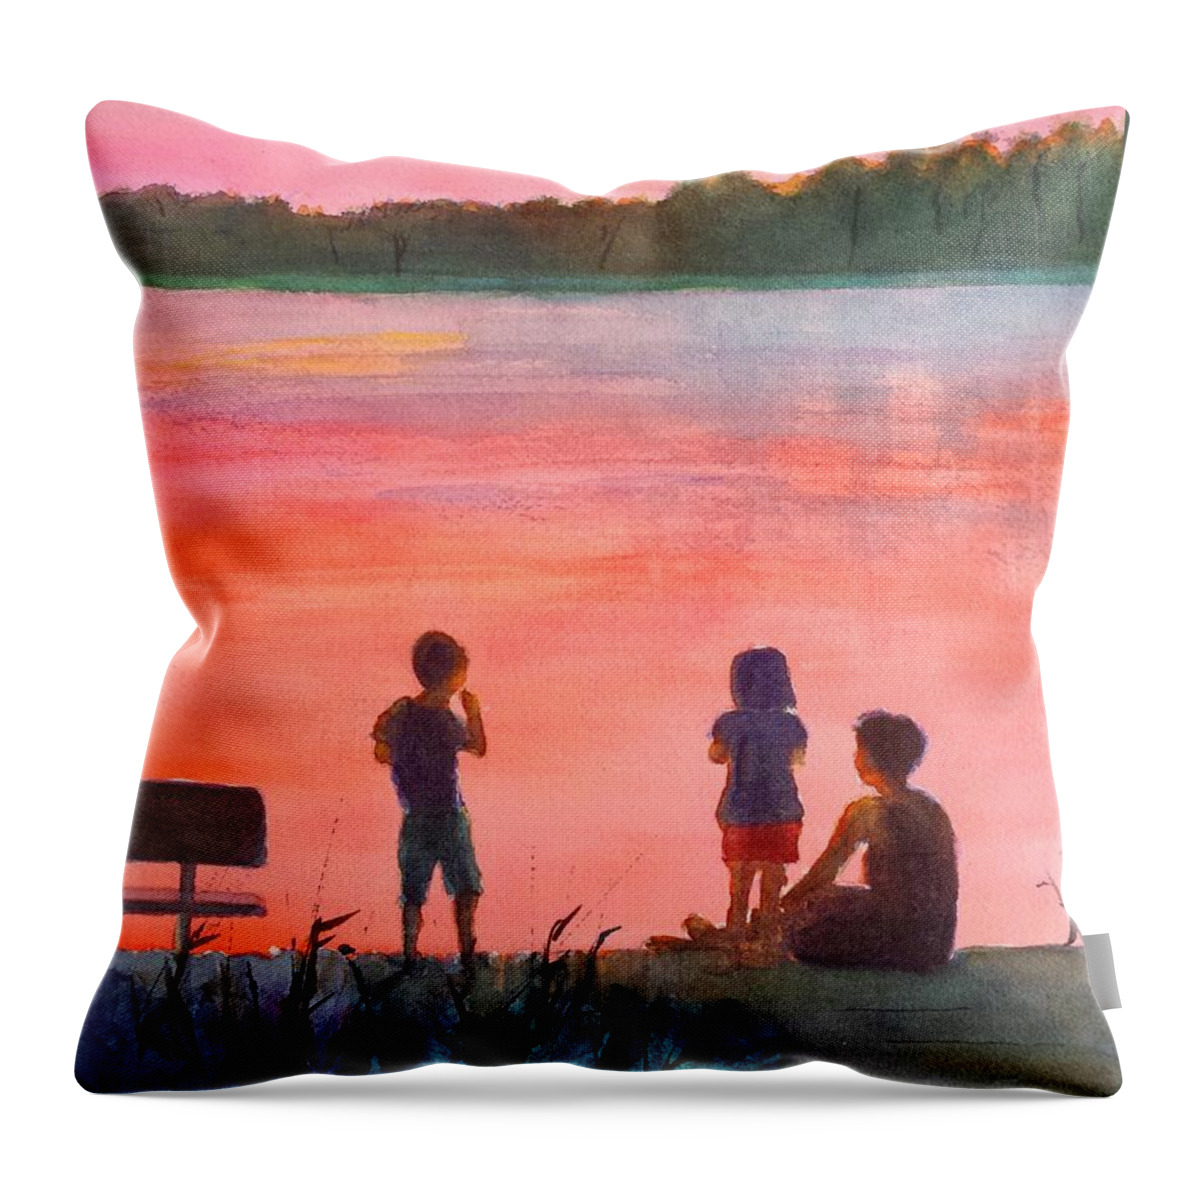 Sunset Throw Pillow featuring the painting Lake Sunset with Family by Carlin Blahnik CarlinArtWatercolor